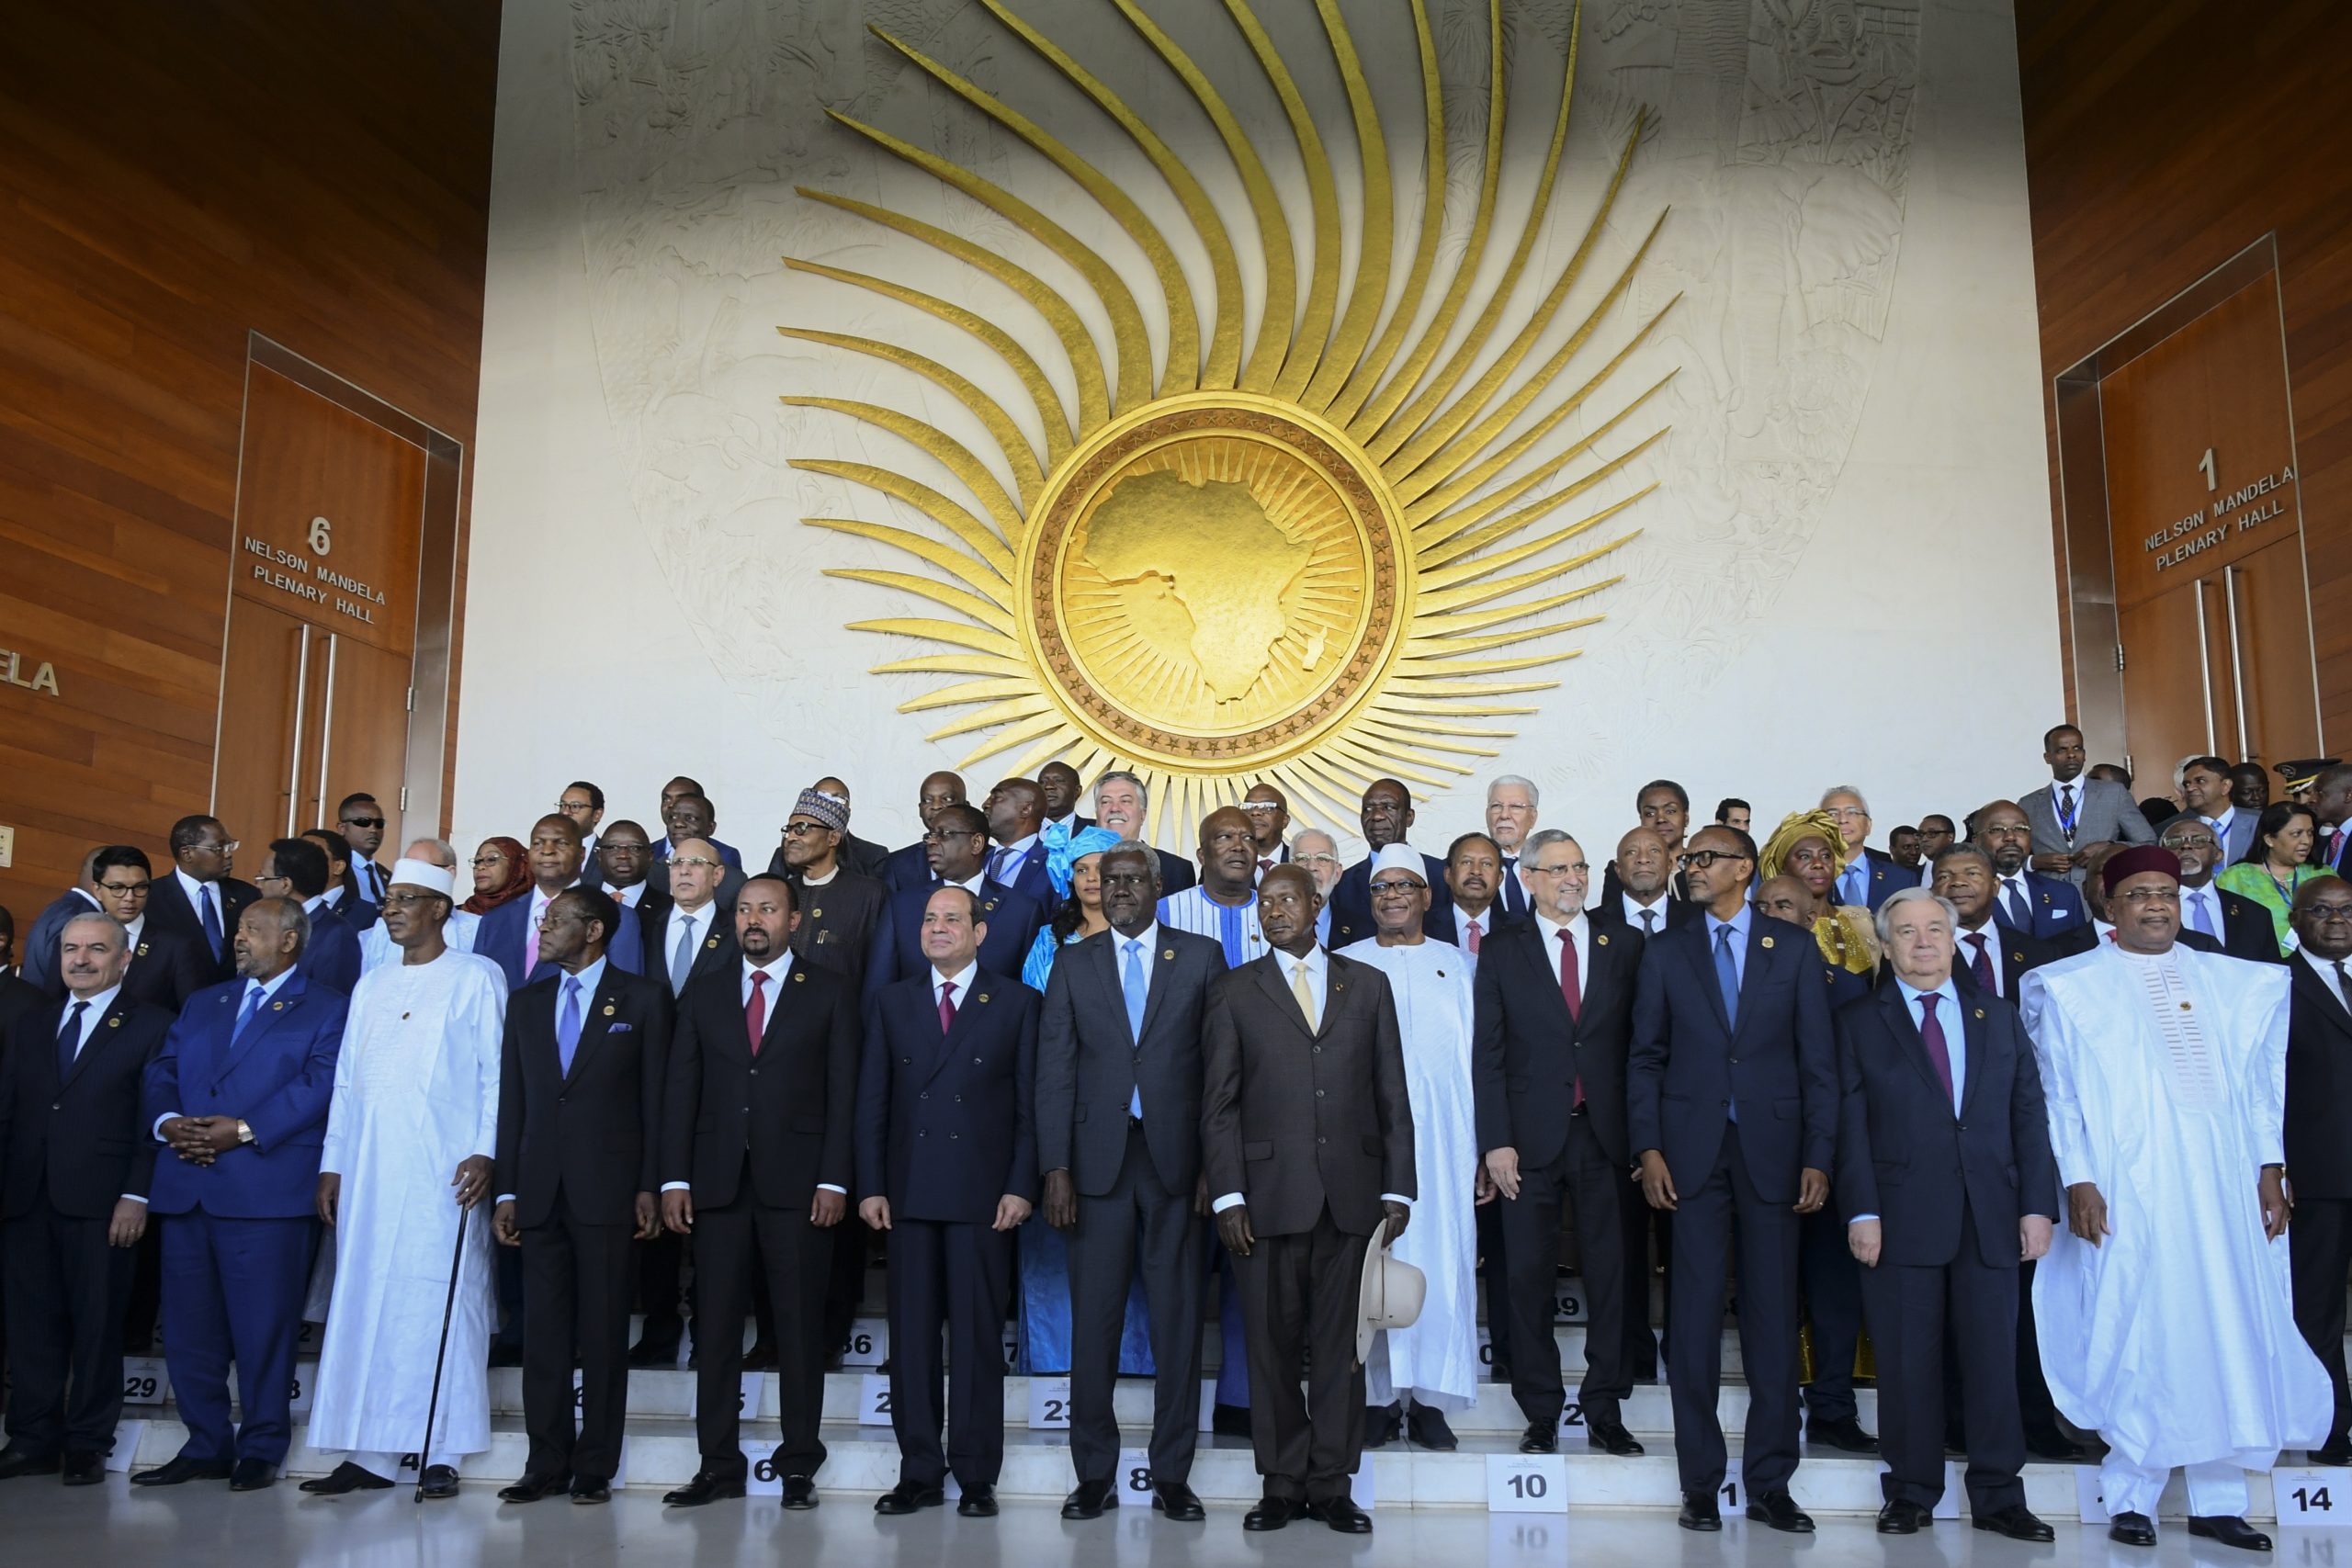 epa08205613 African leaders pose for a group photo during the 33rd African Union Summit in Addis Ababa, Ethiopia, 09 February 2020. African leaders are gathering in Ethiopian capital for an annual meeting to discuss violence and conflicts in the continent.  EPA/STR